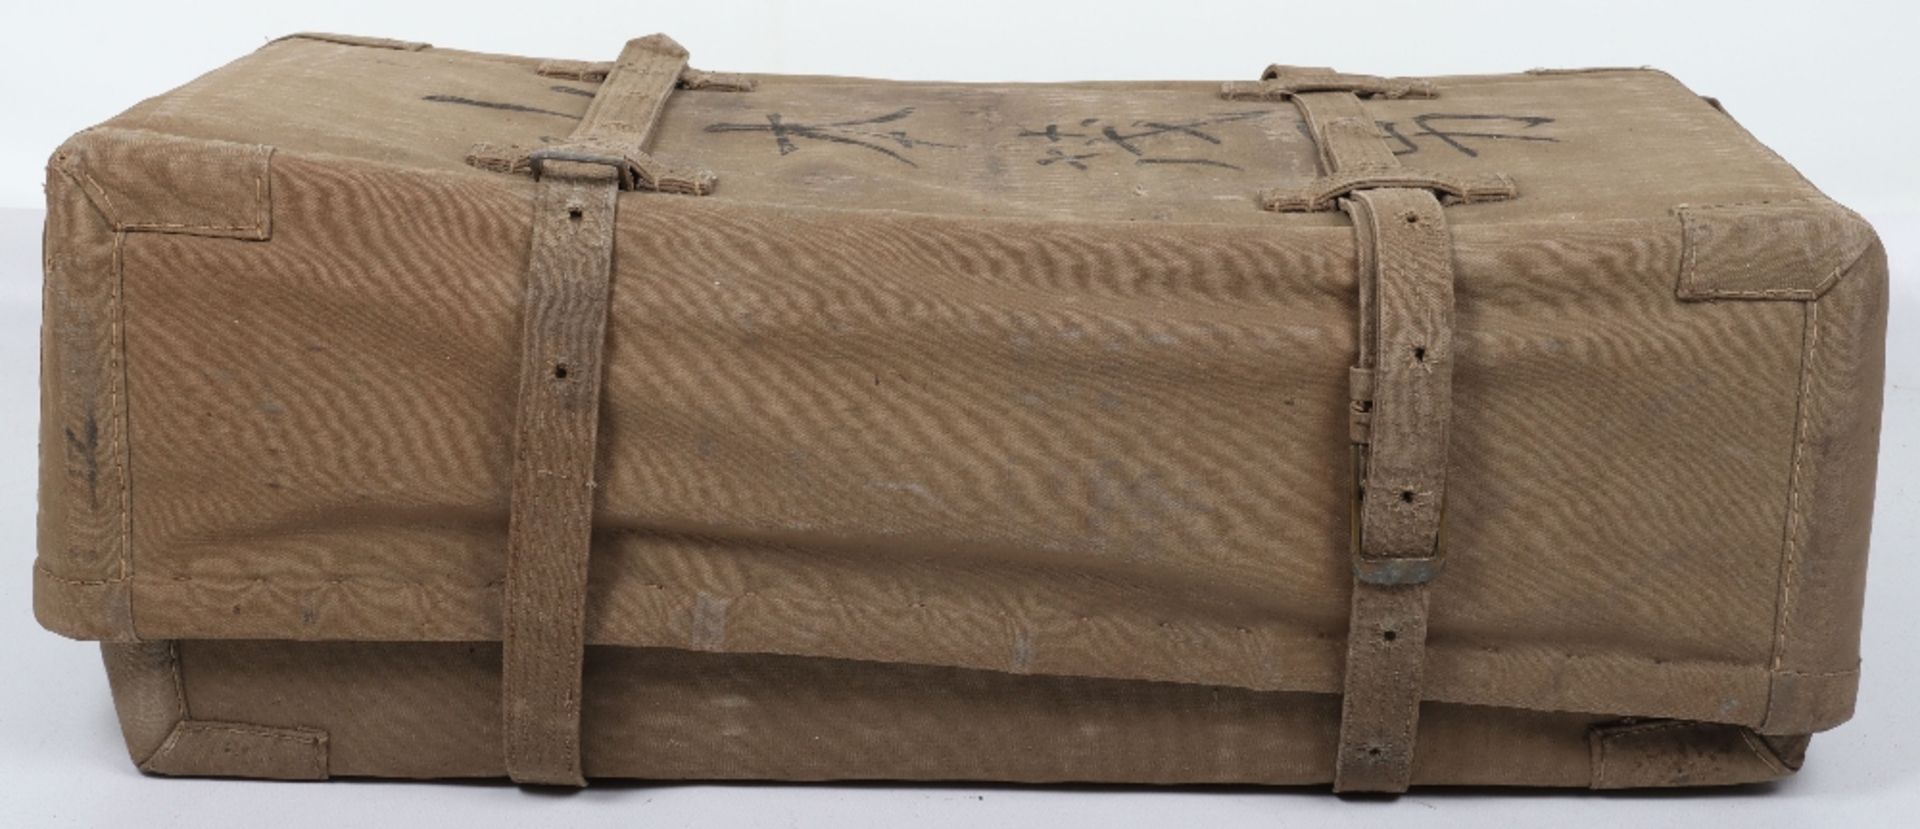 WW2 Japanese Army Pilots Uniform Group in Storage Case - Image 11 of 32